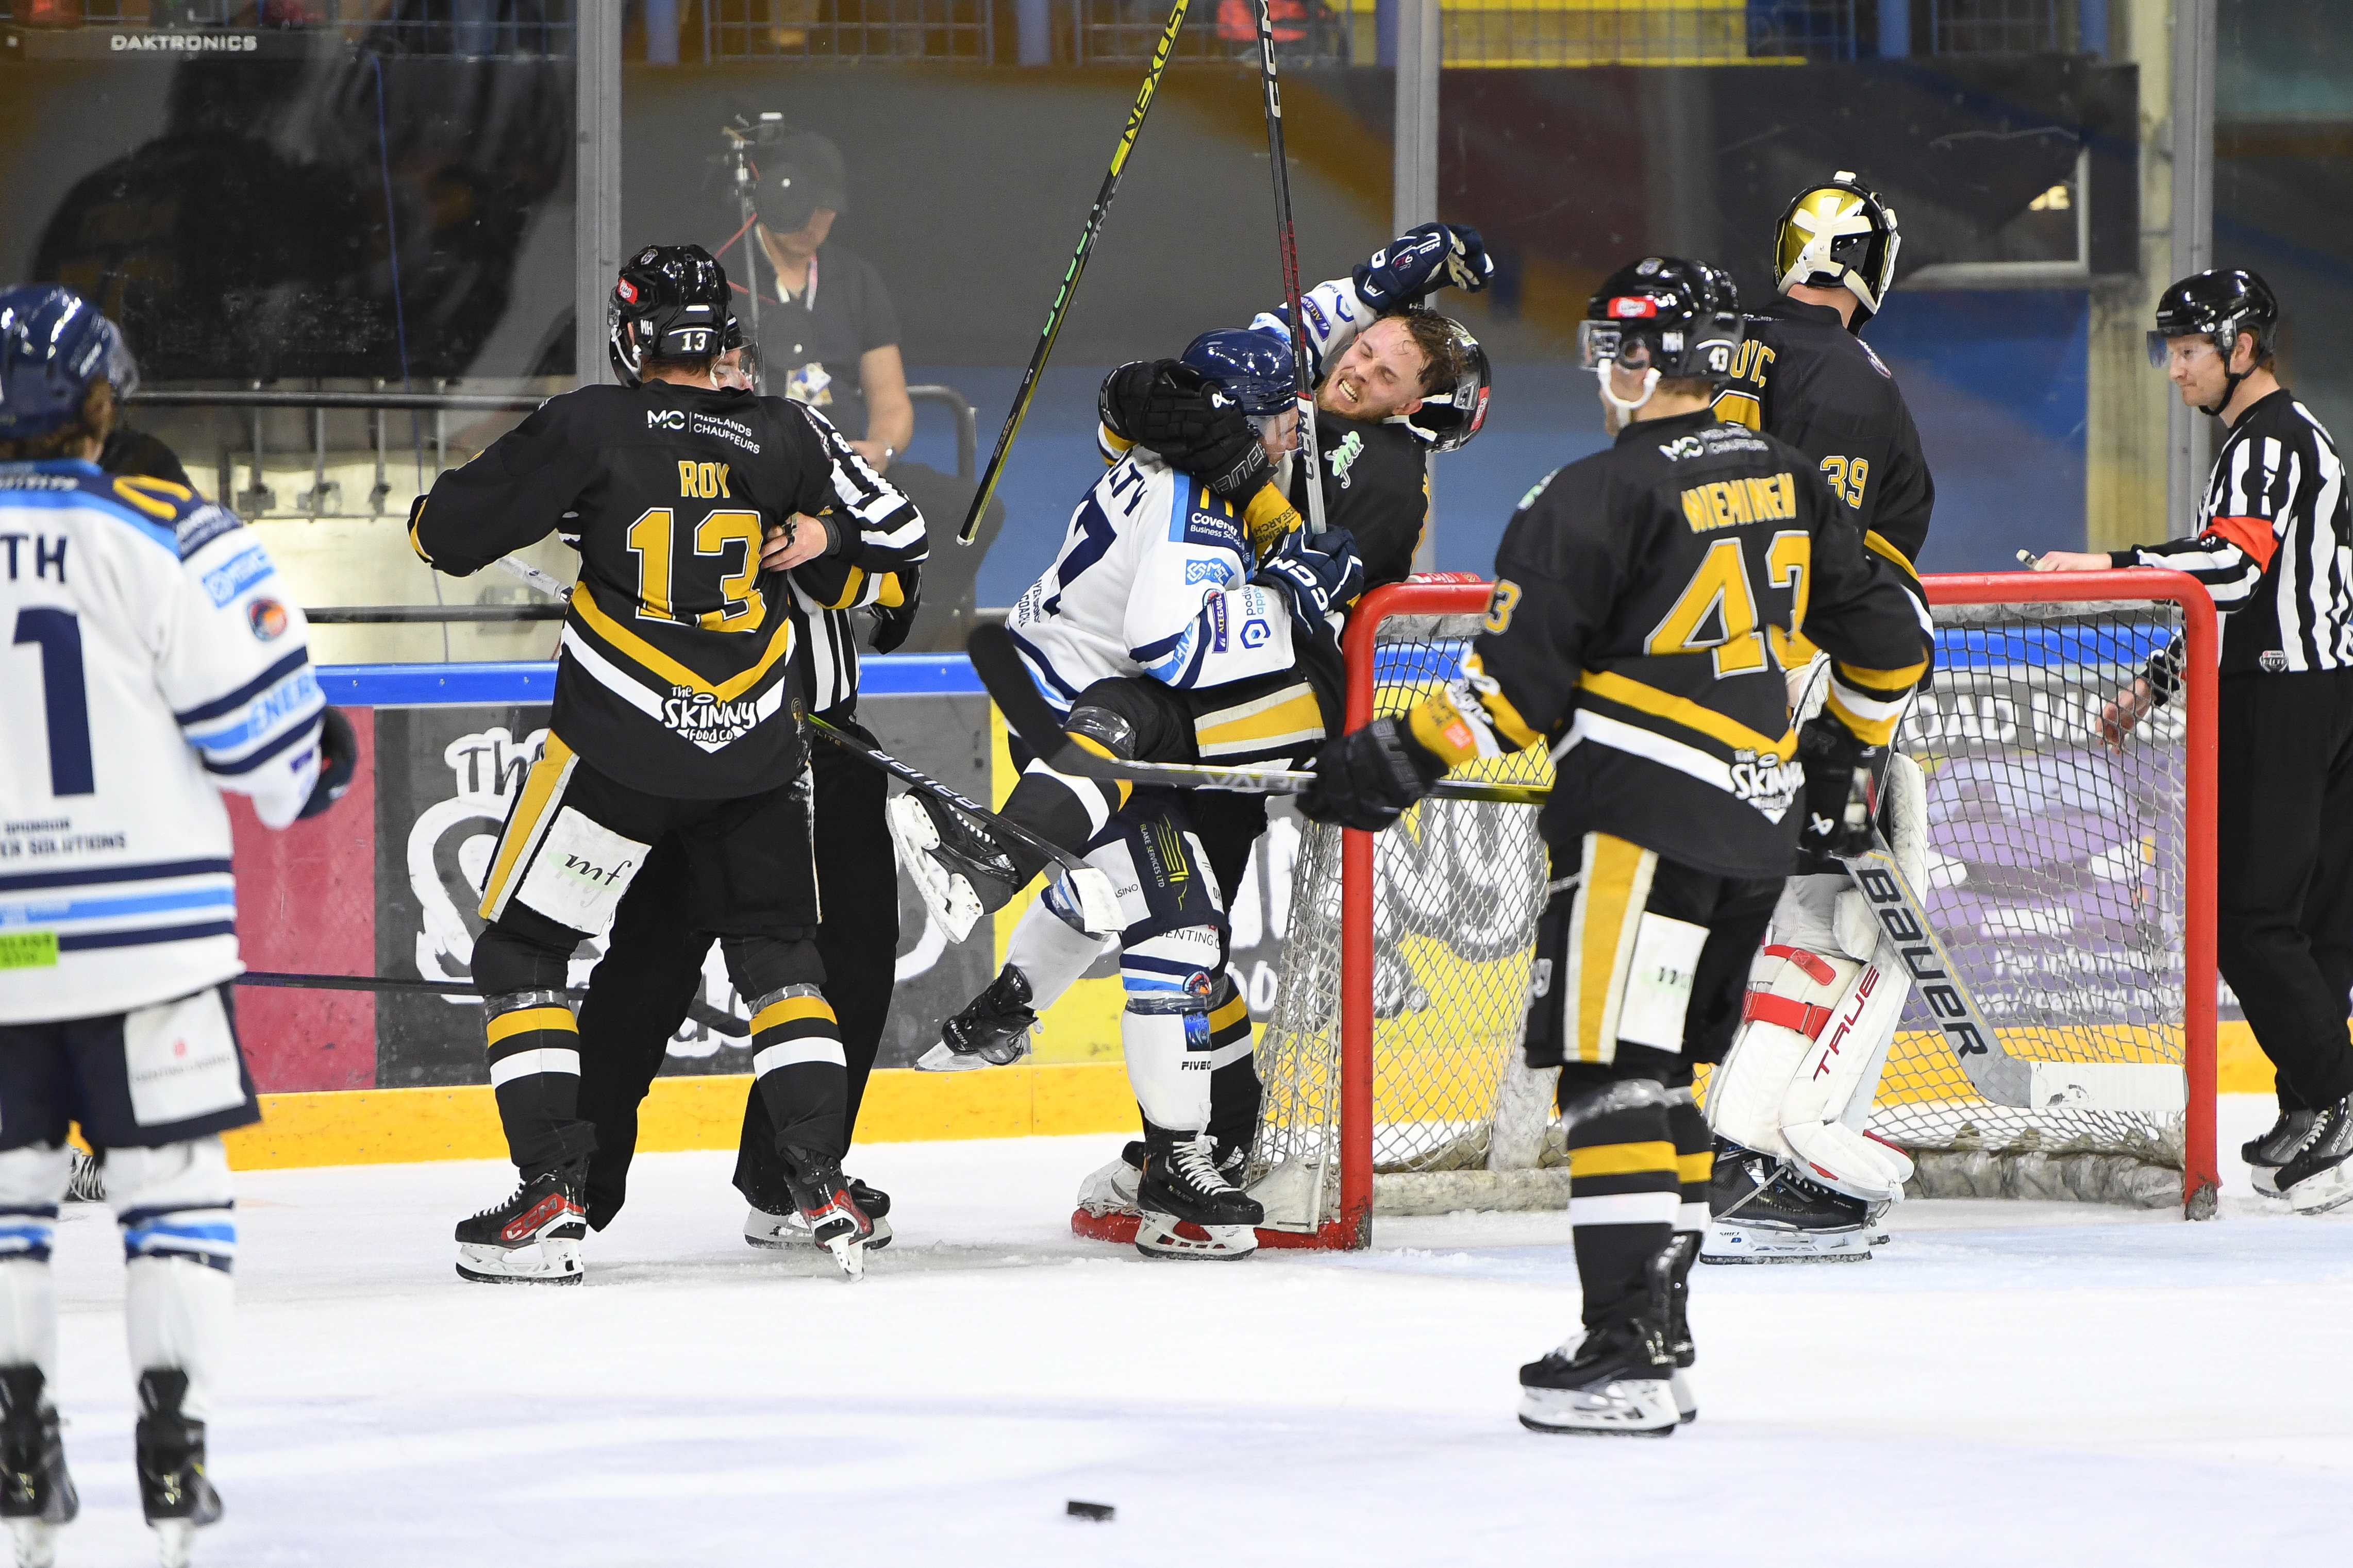 RELIVE THE BEST BITS FROM WIN OVER BLAZE ON SATURDAY Top Image